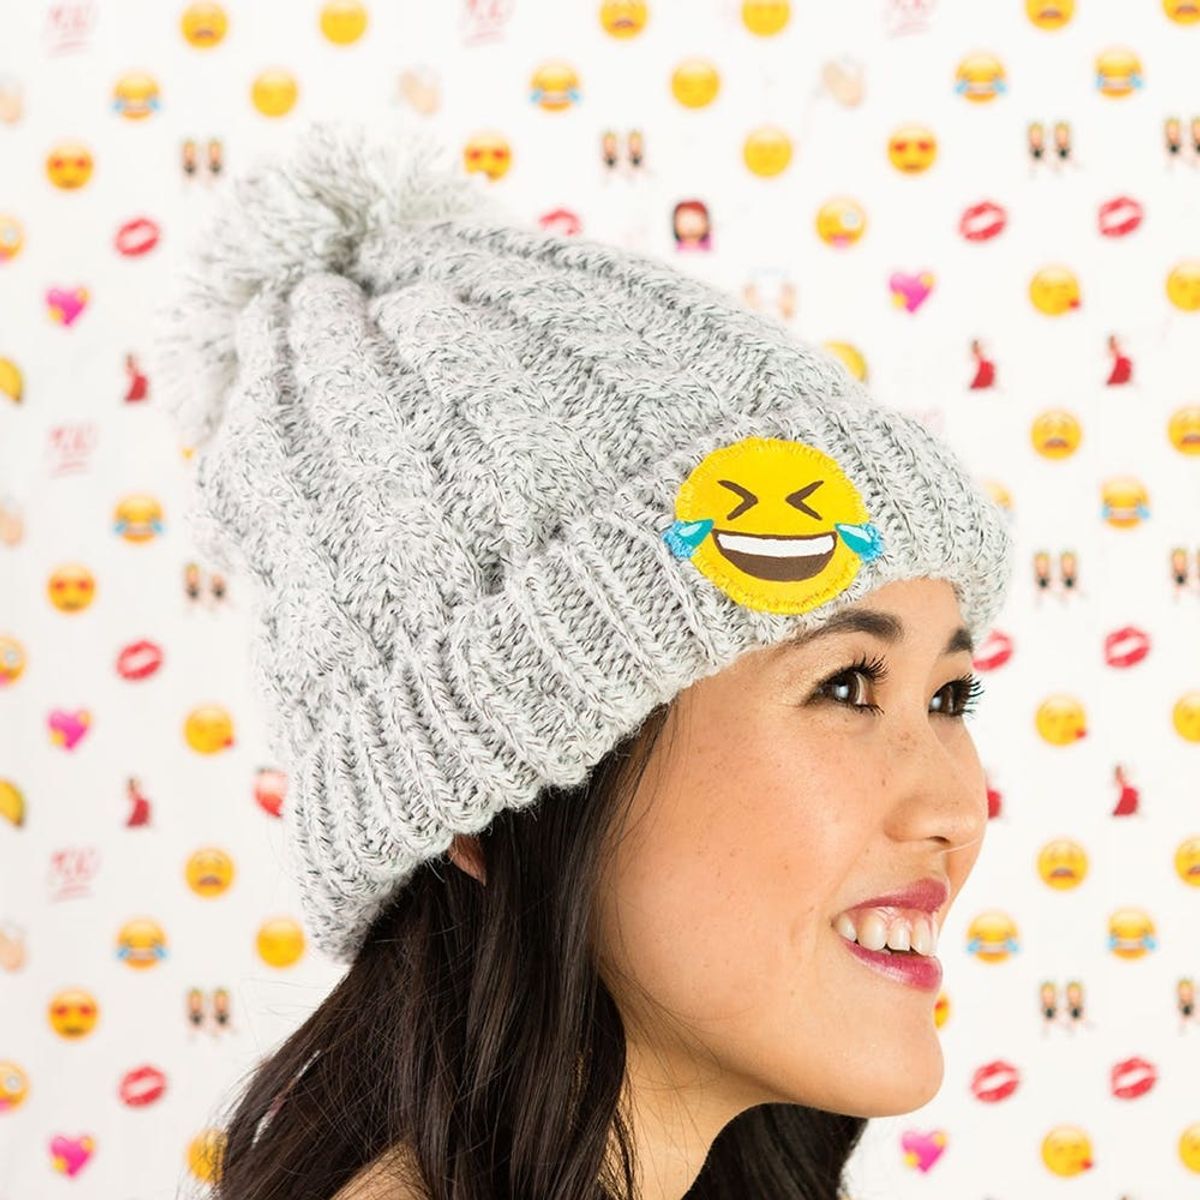 Turn an Old Hat into Something New With a DIY Patch of Your Favorite New Emoji